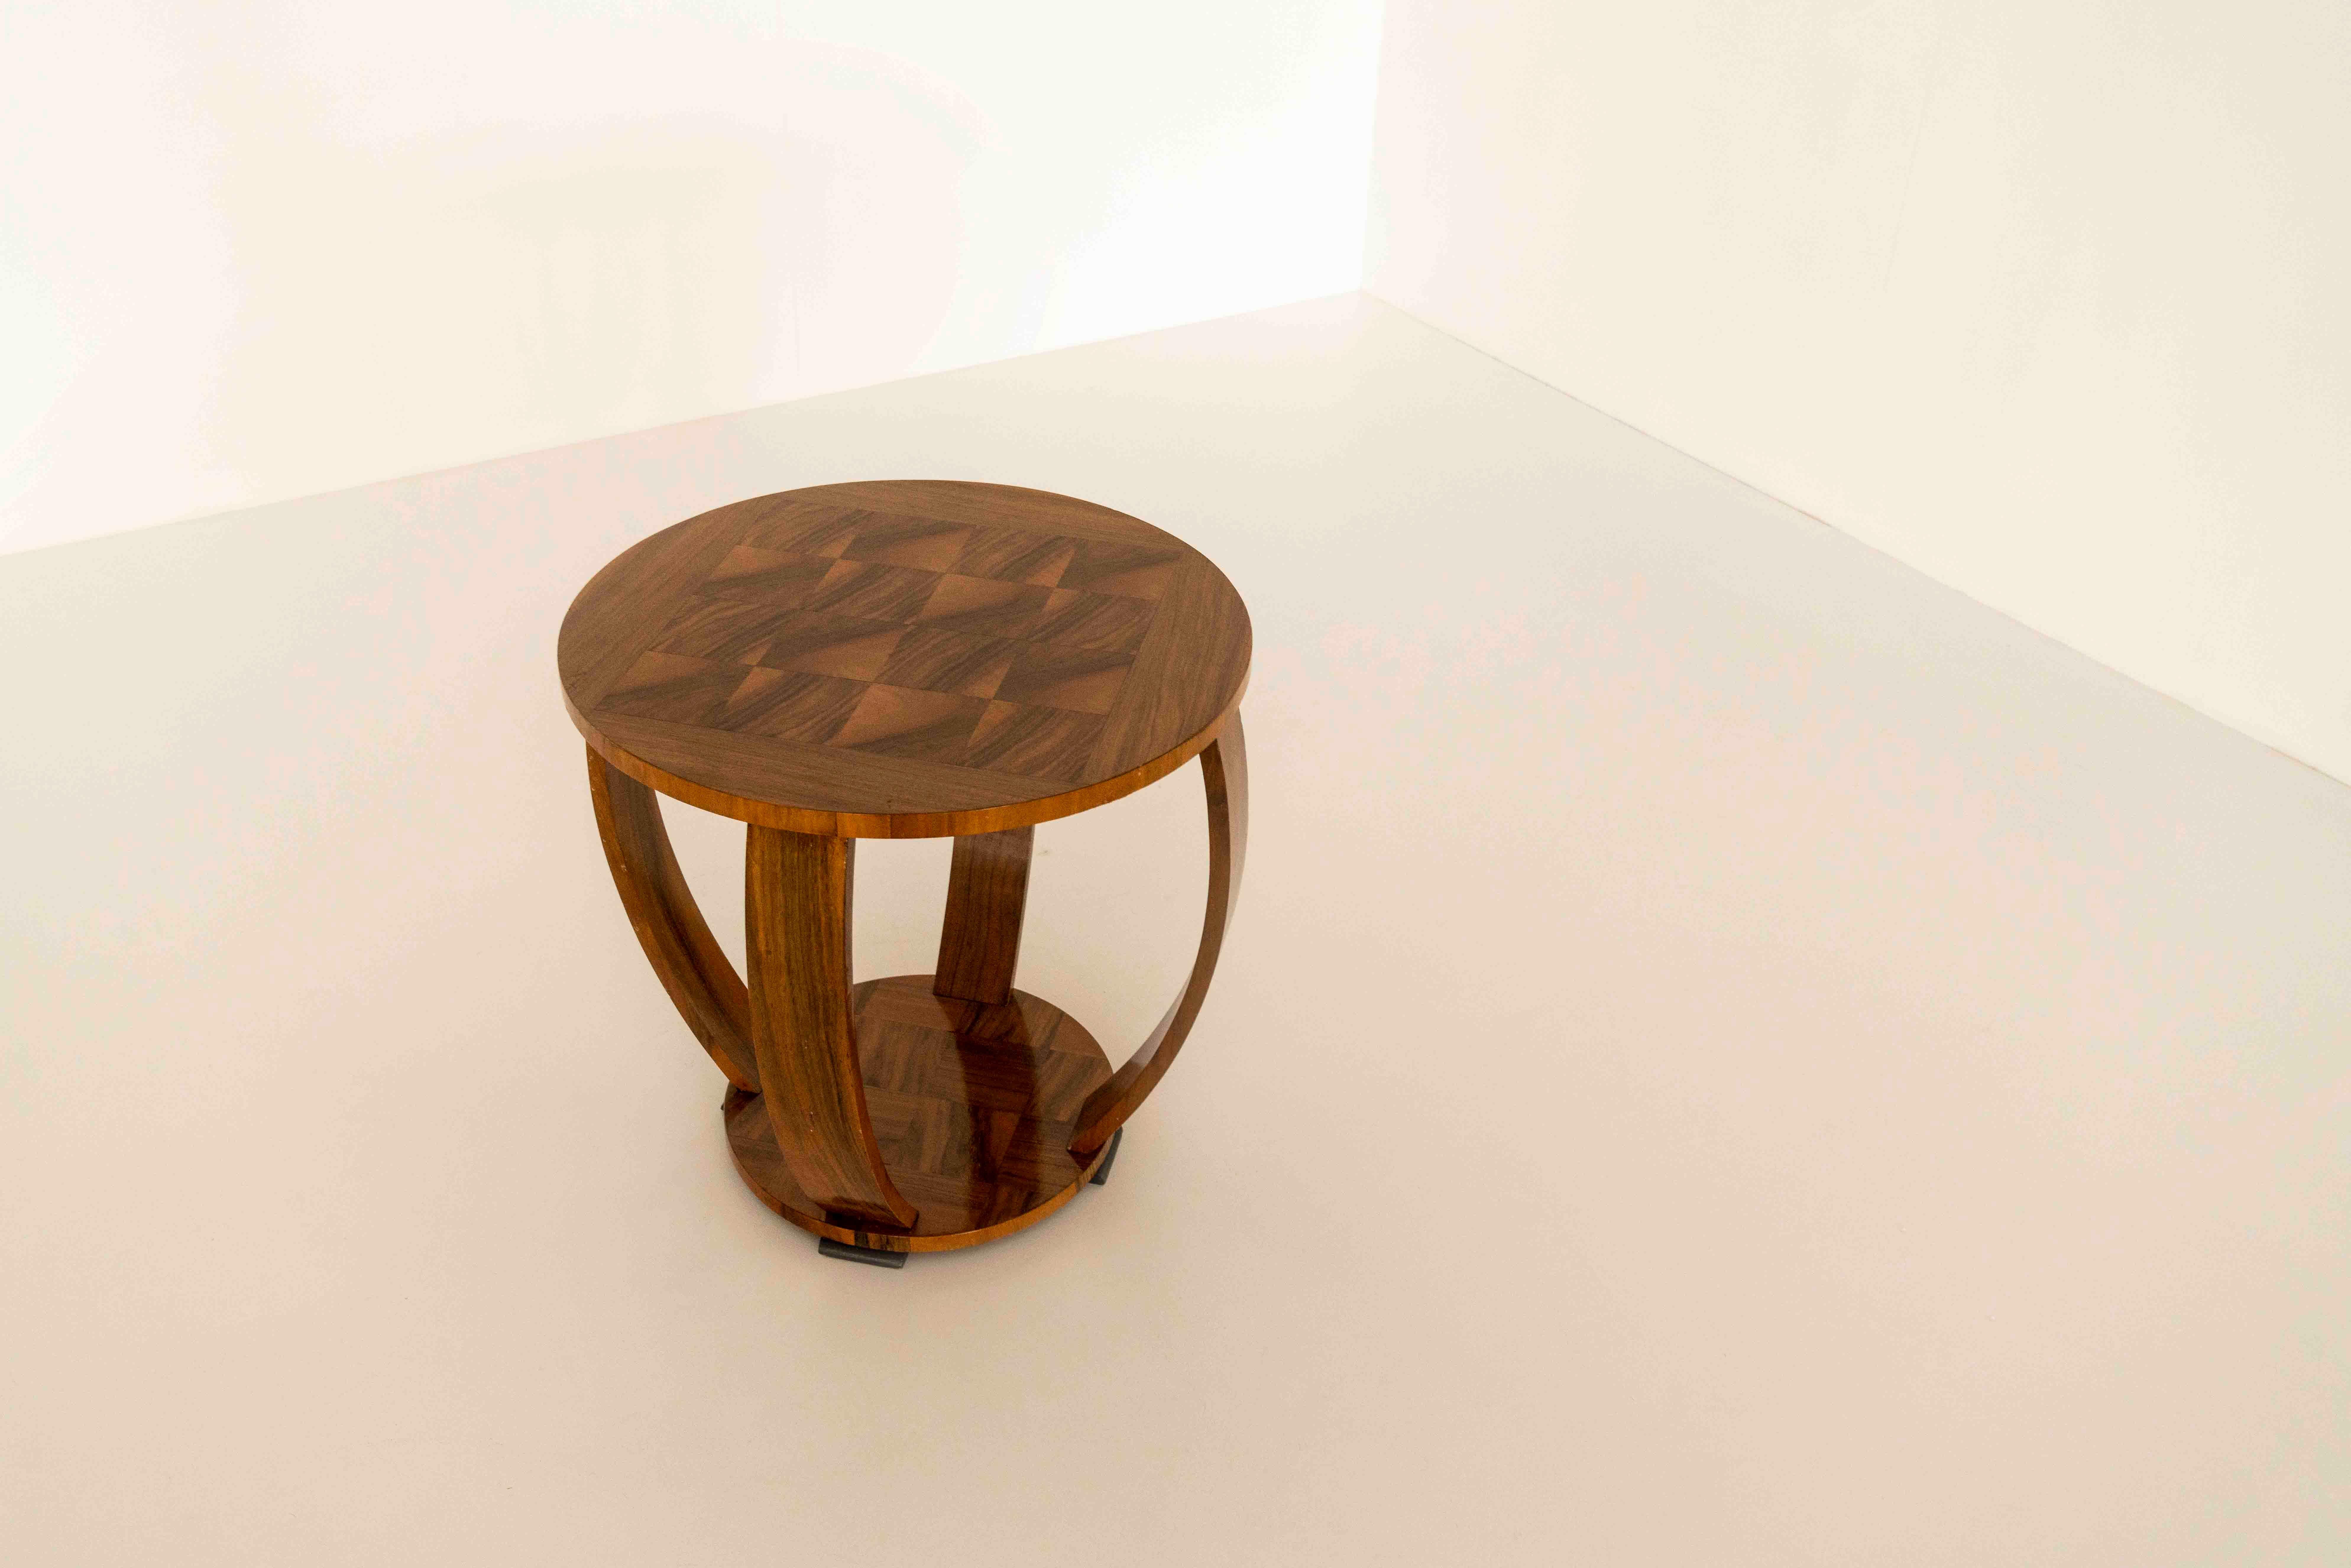 Round Art Deco Coffee Table with Chesspiece Motiv on Top 3